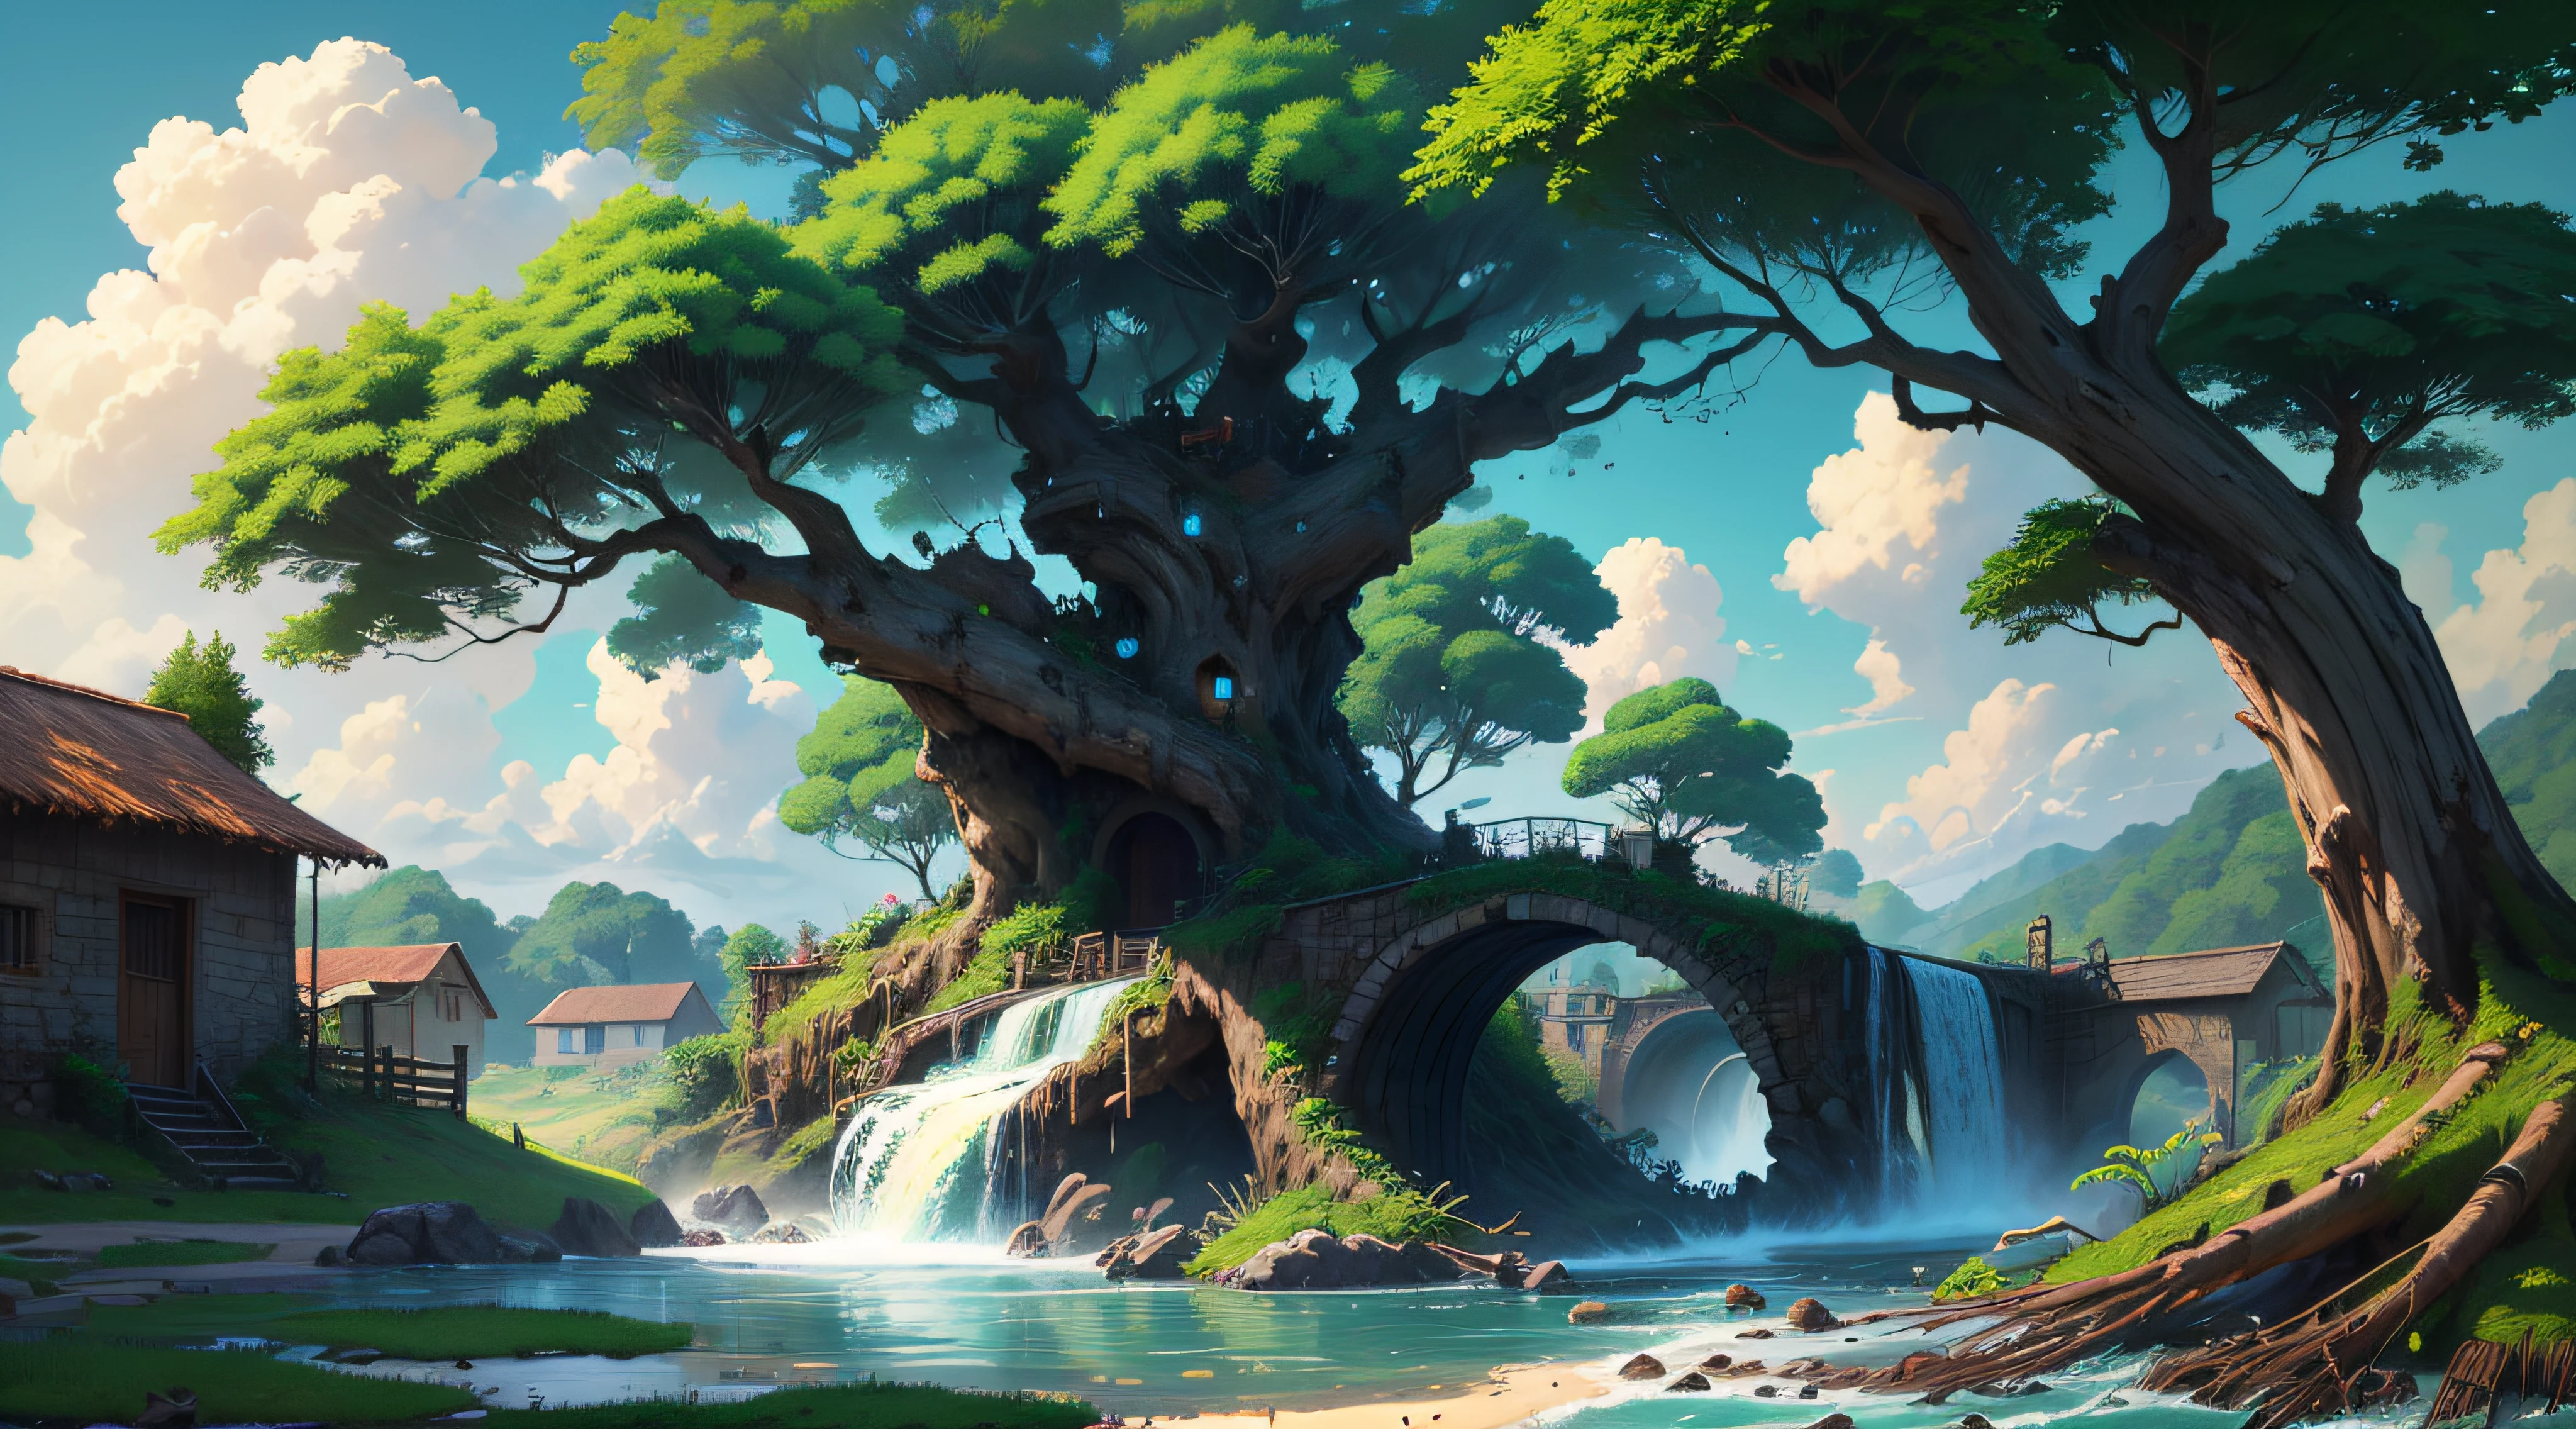 Gigantic colorful trees with many vines, palmtrees, coconut tree, fallen logs, a watermill with a waterwheel, Windmill Mill, in a lush waterfall, river with big hyper realistic rocks, sky with clouds, floor, moonligh, global ilumination, Depth of field,